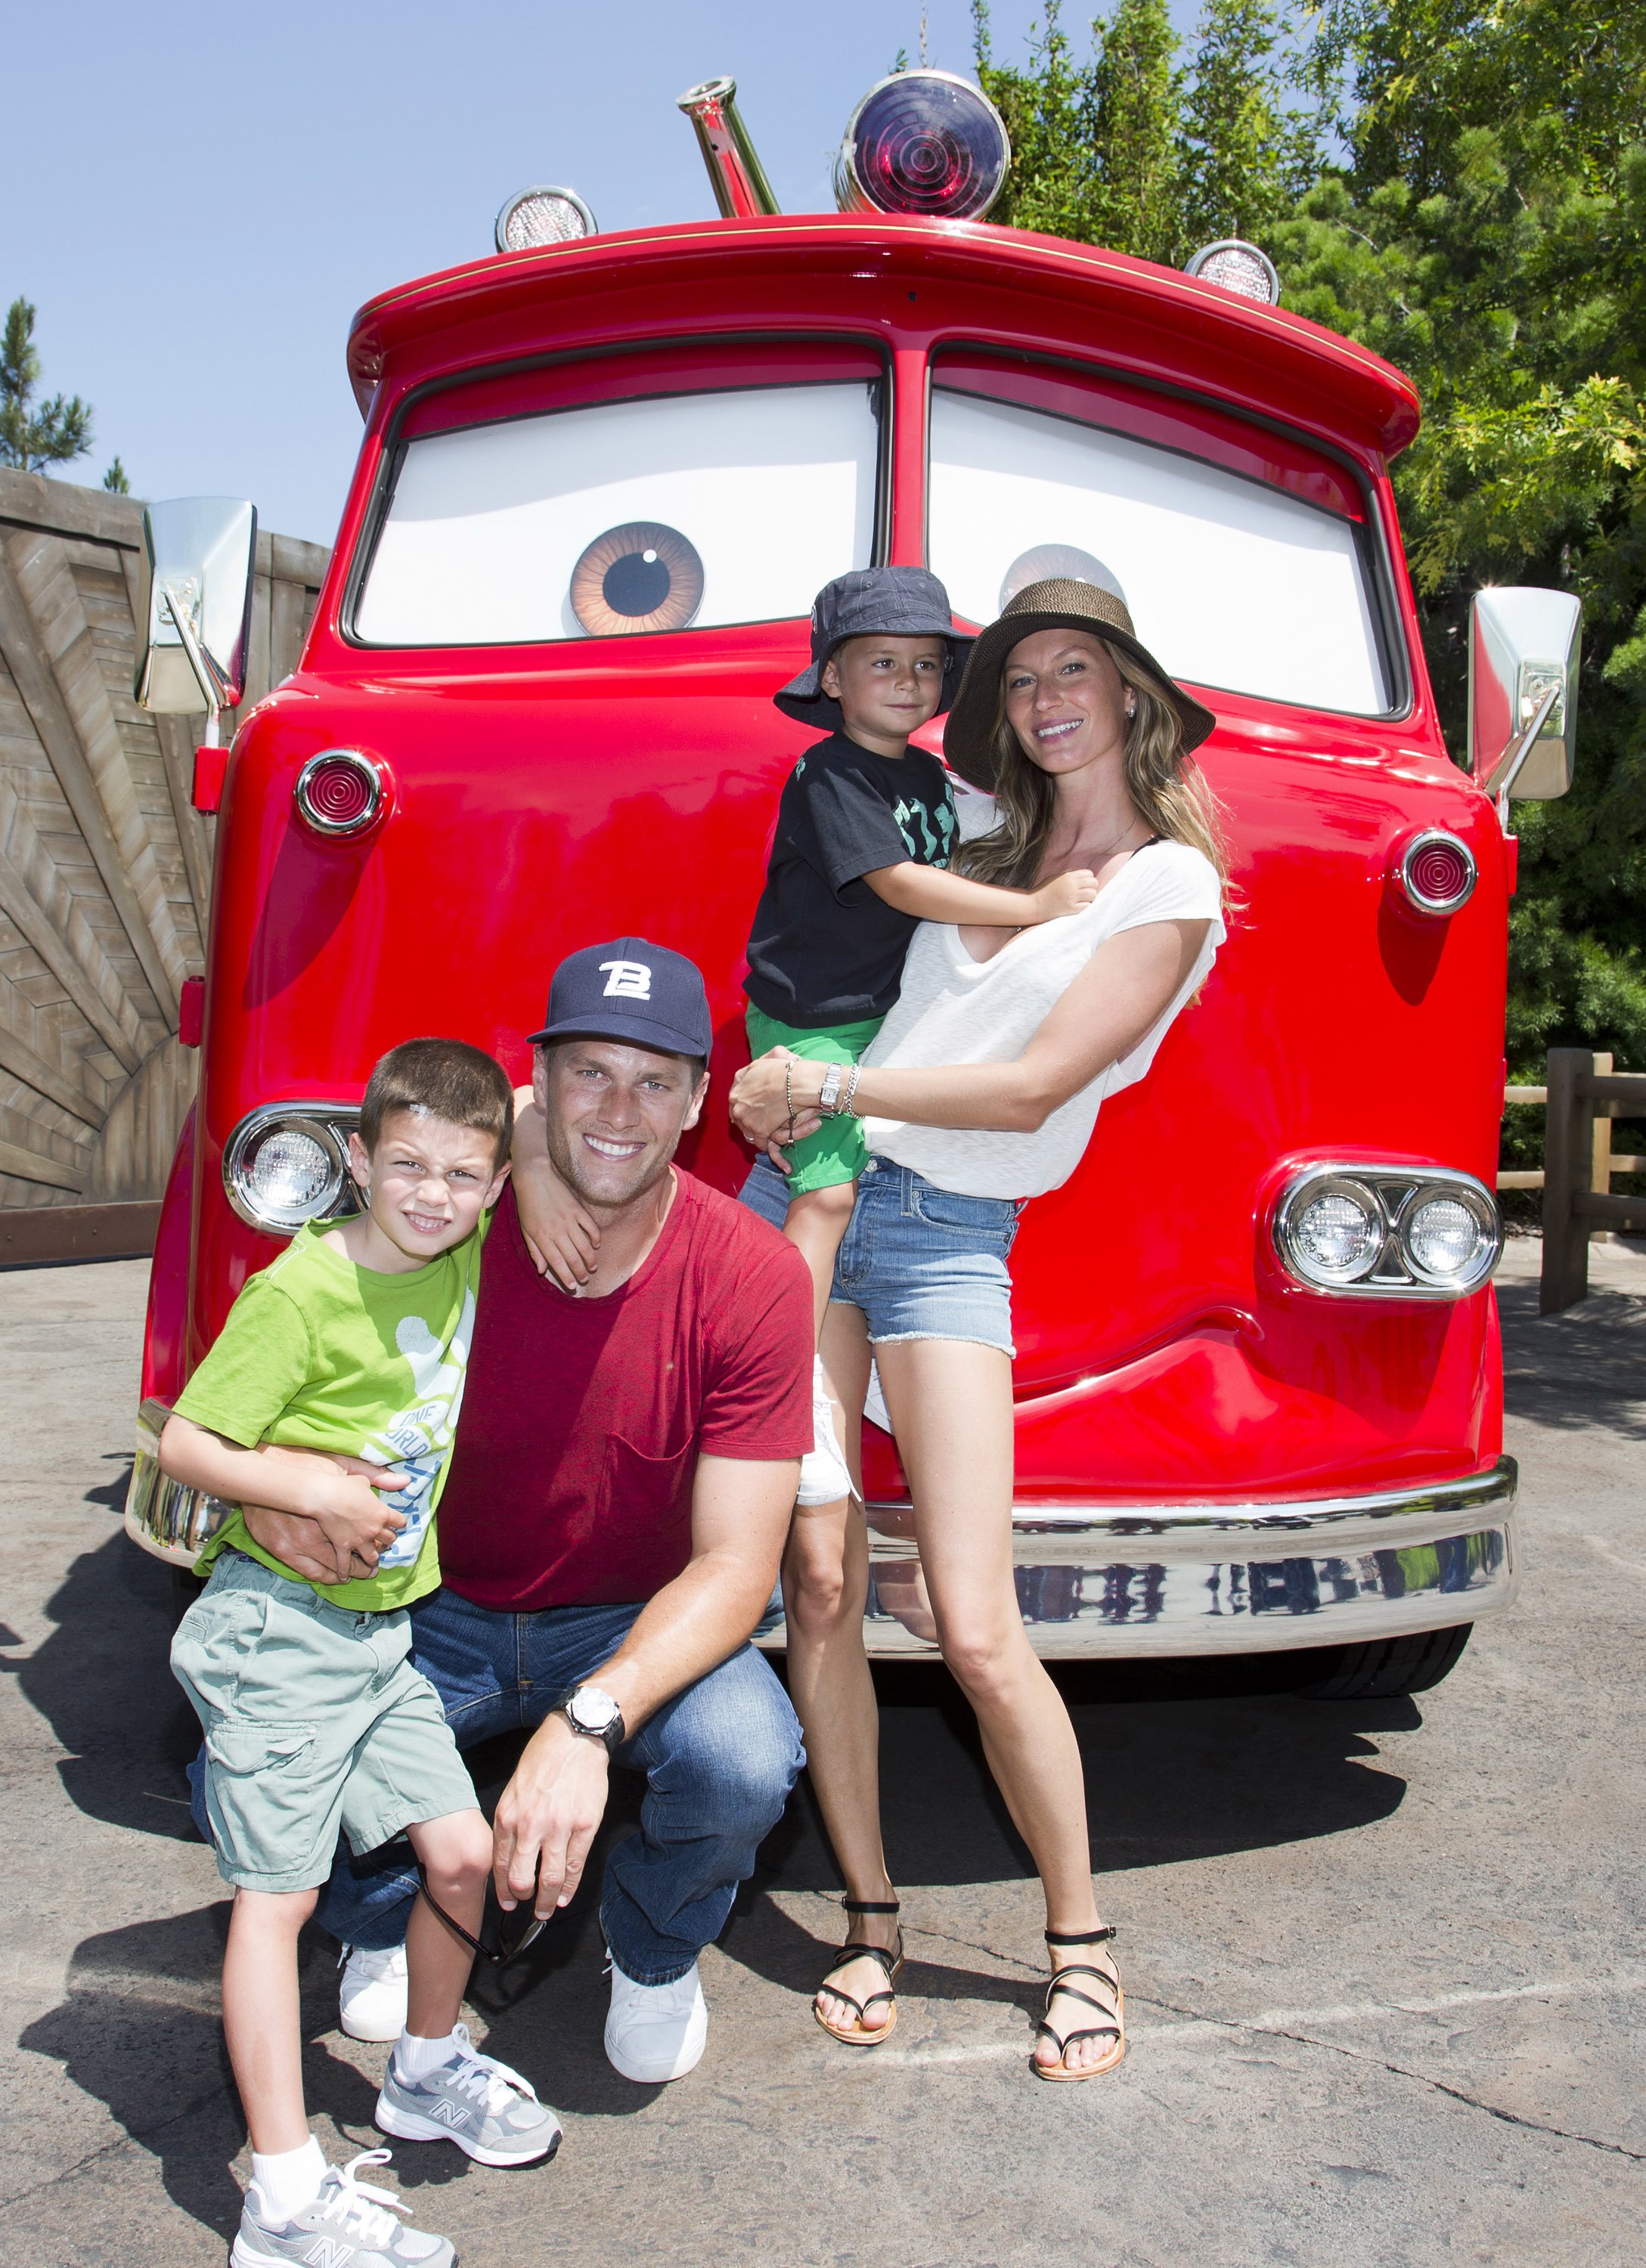 Tom Brady, his son Jack, 5, Gisele Bundchen, and their son Benjamin, 3, pose with Red the Fire Truck at Cars Land at Disney California Adventure park July 2, 2013 in Anaheim, California | Source: Getty Images 